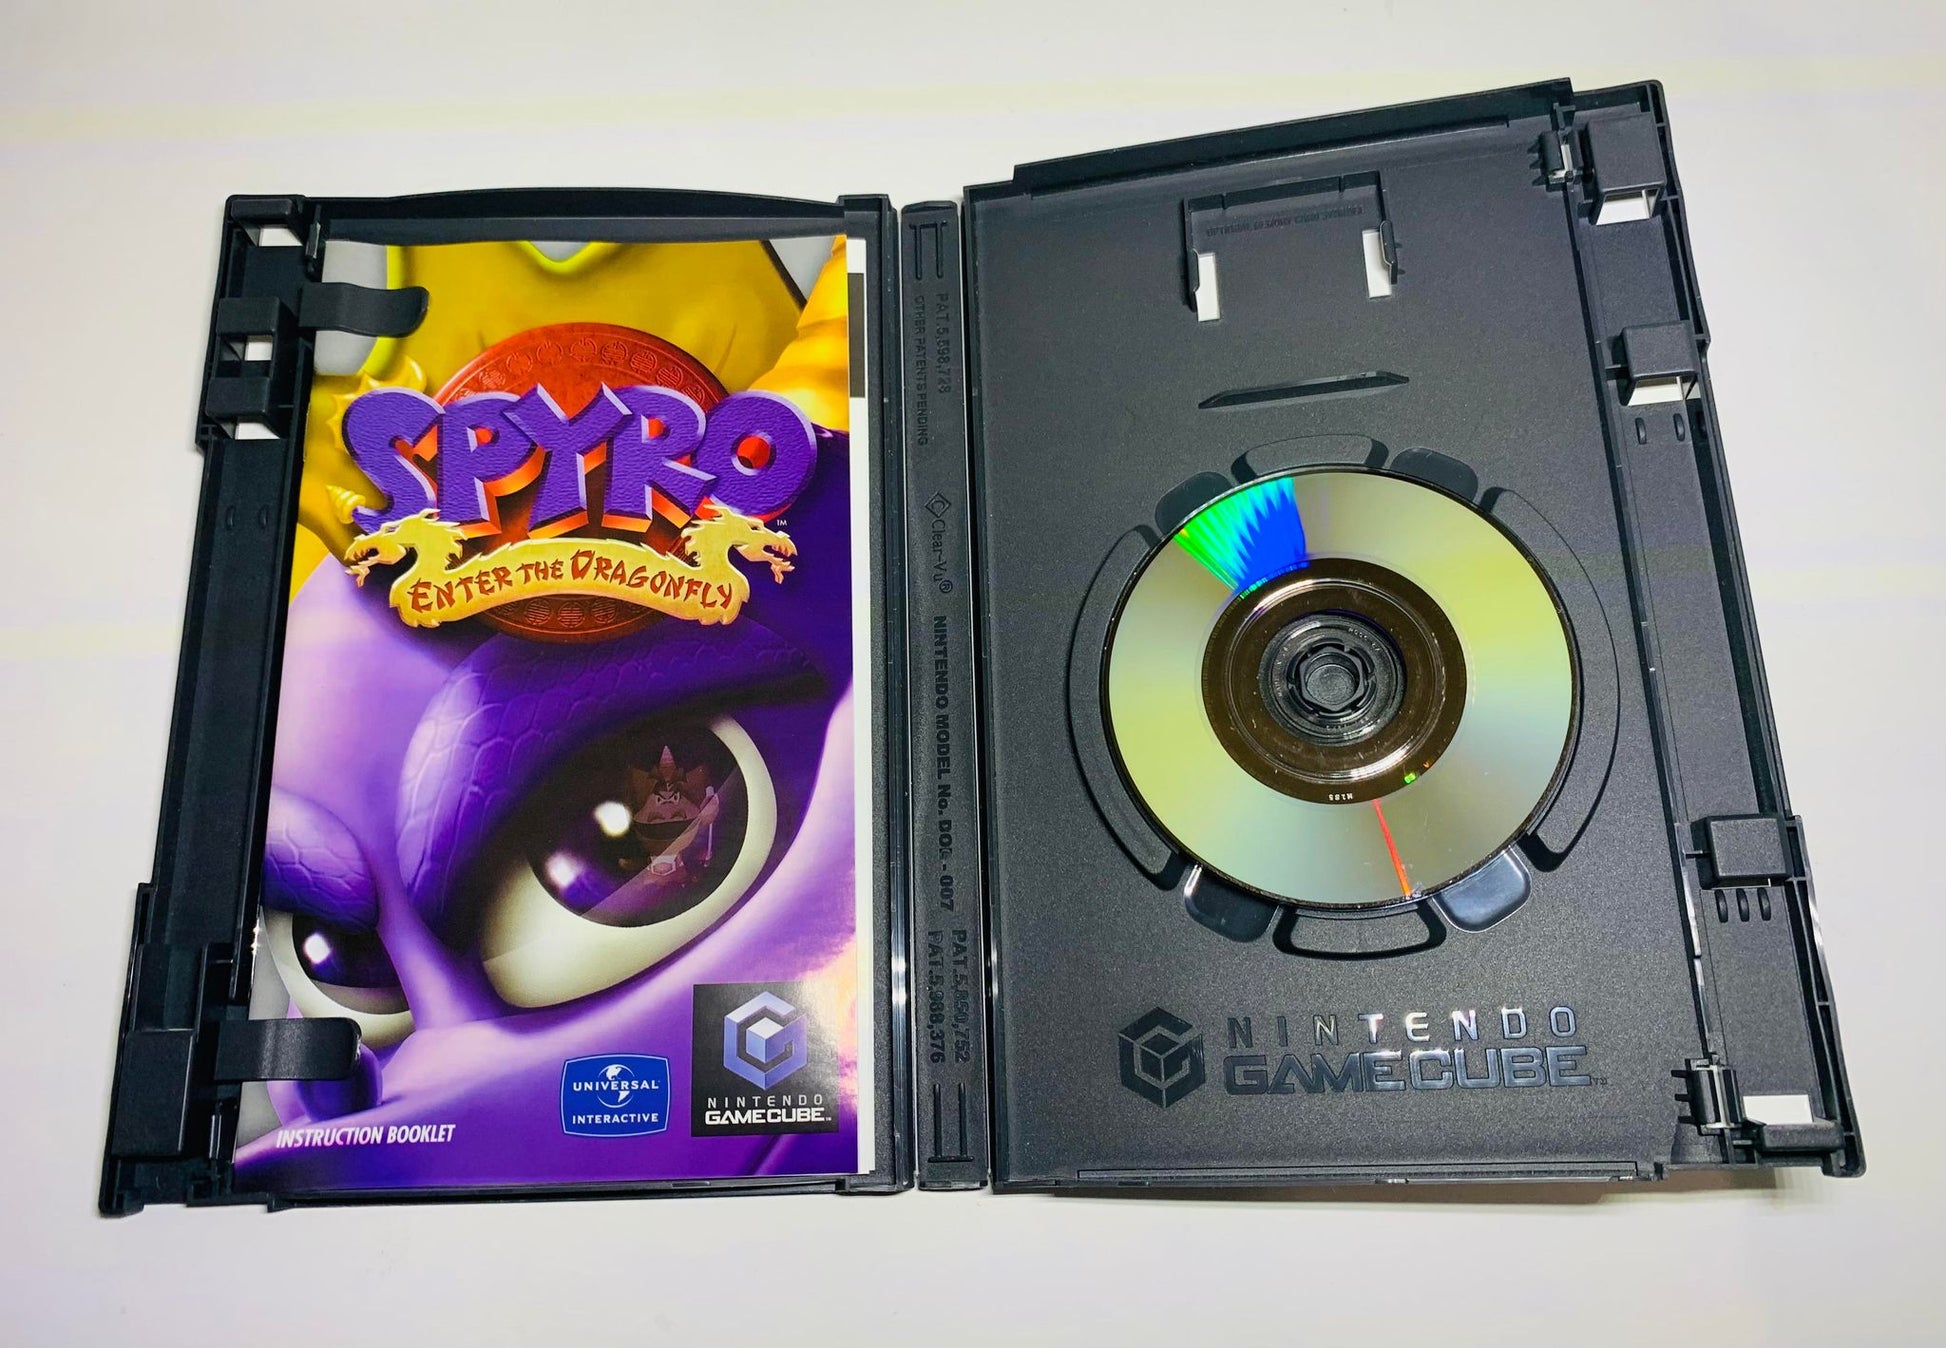 SPYRO ENTER THE DRAGONFLY PLAYERS CHOICE NINTENDO GAMECUBE NGC - jeux video game-x